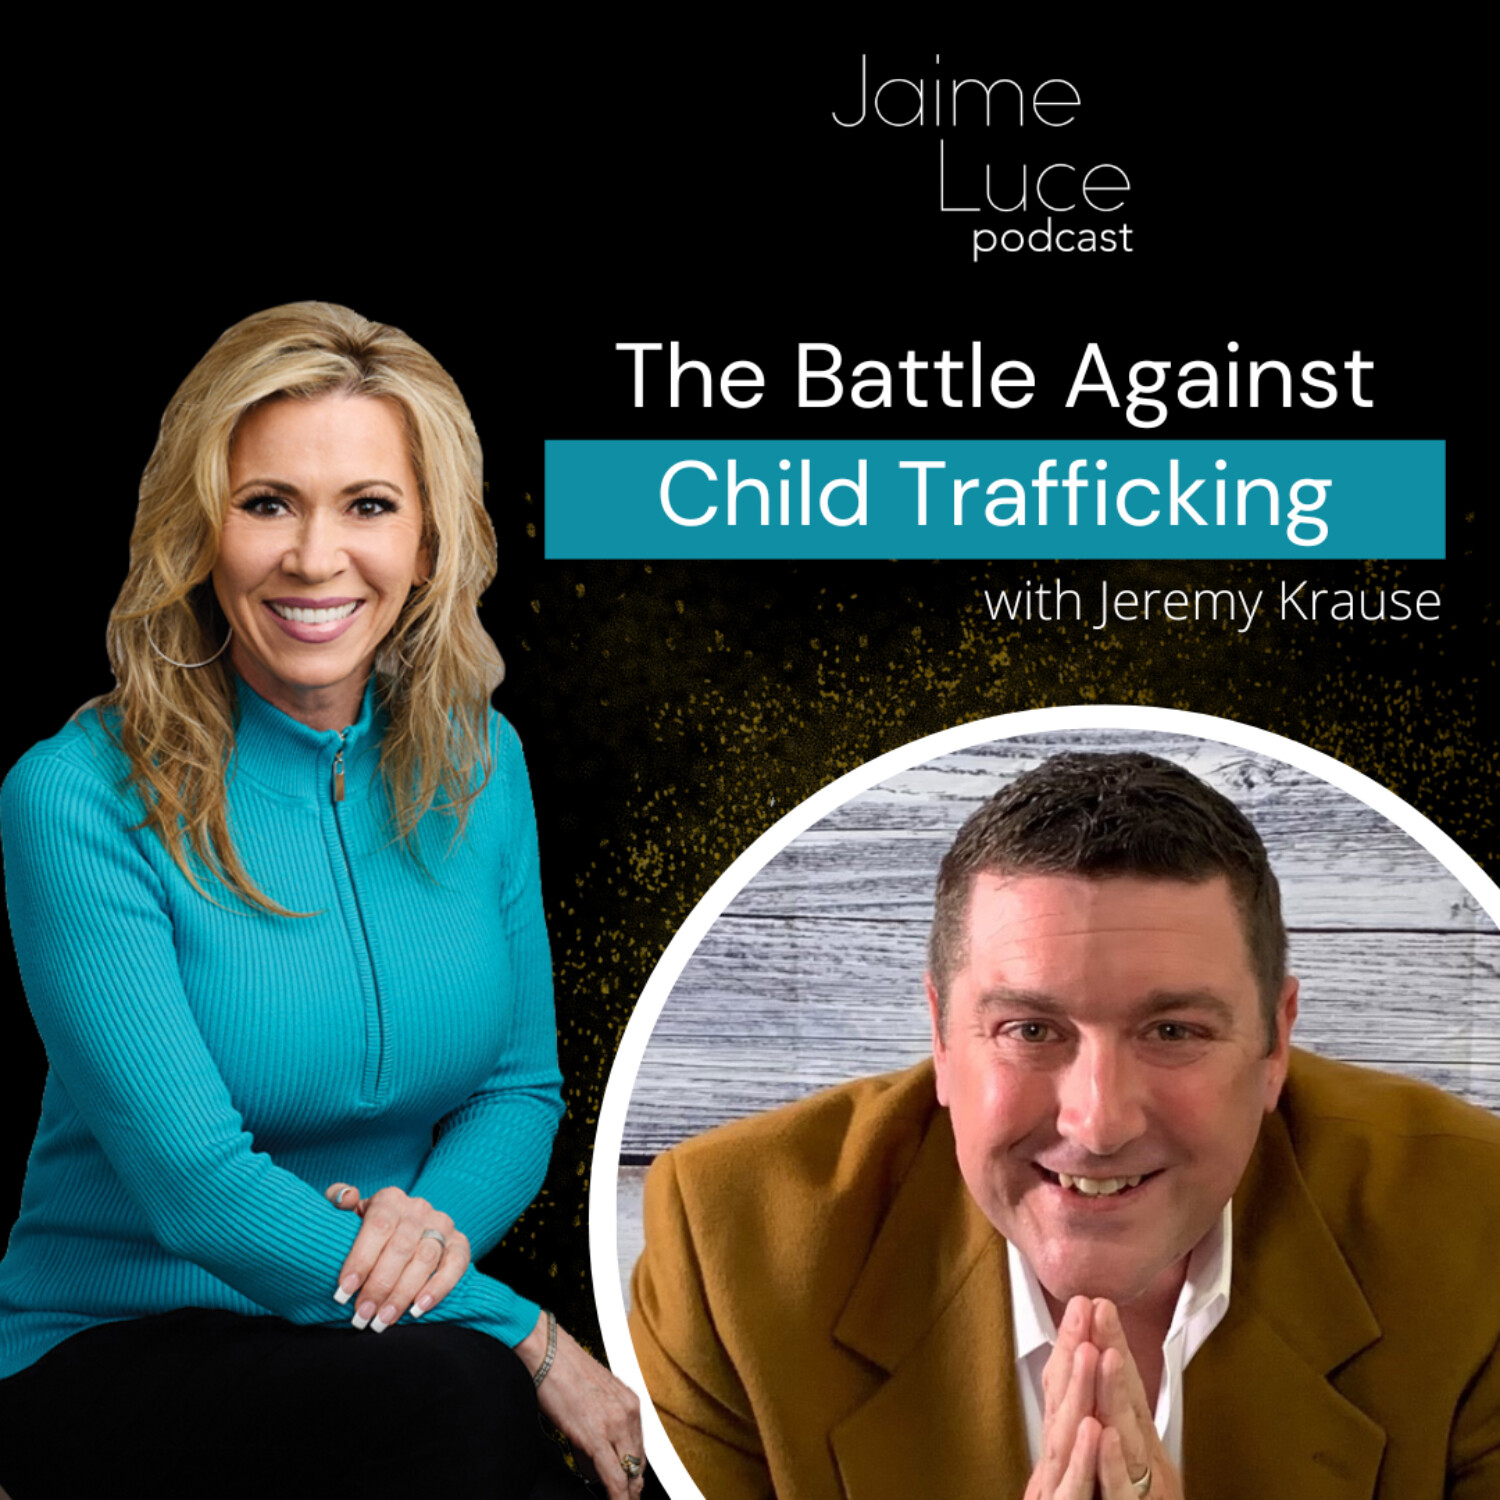 The Battle Against Child Trafficking with Jeremy Krause